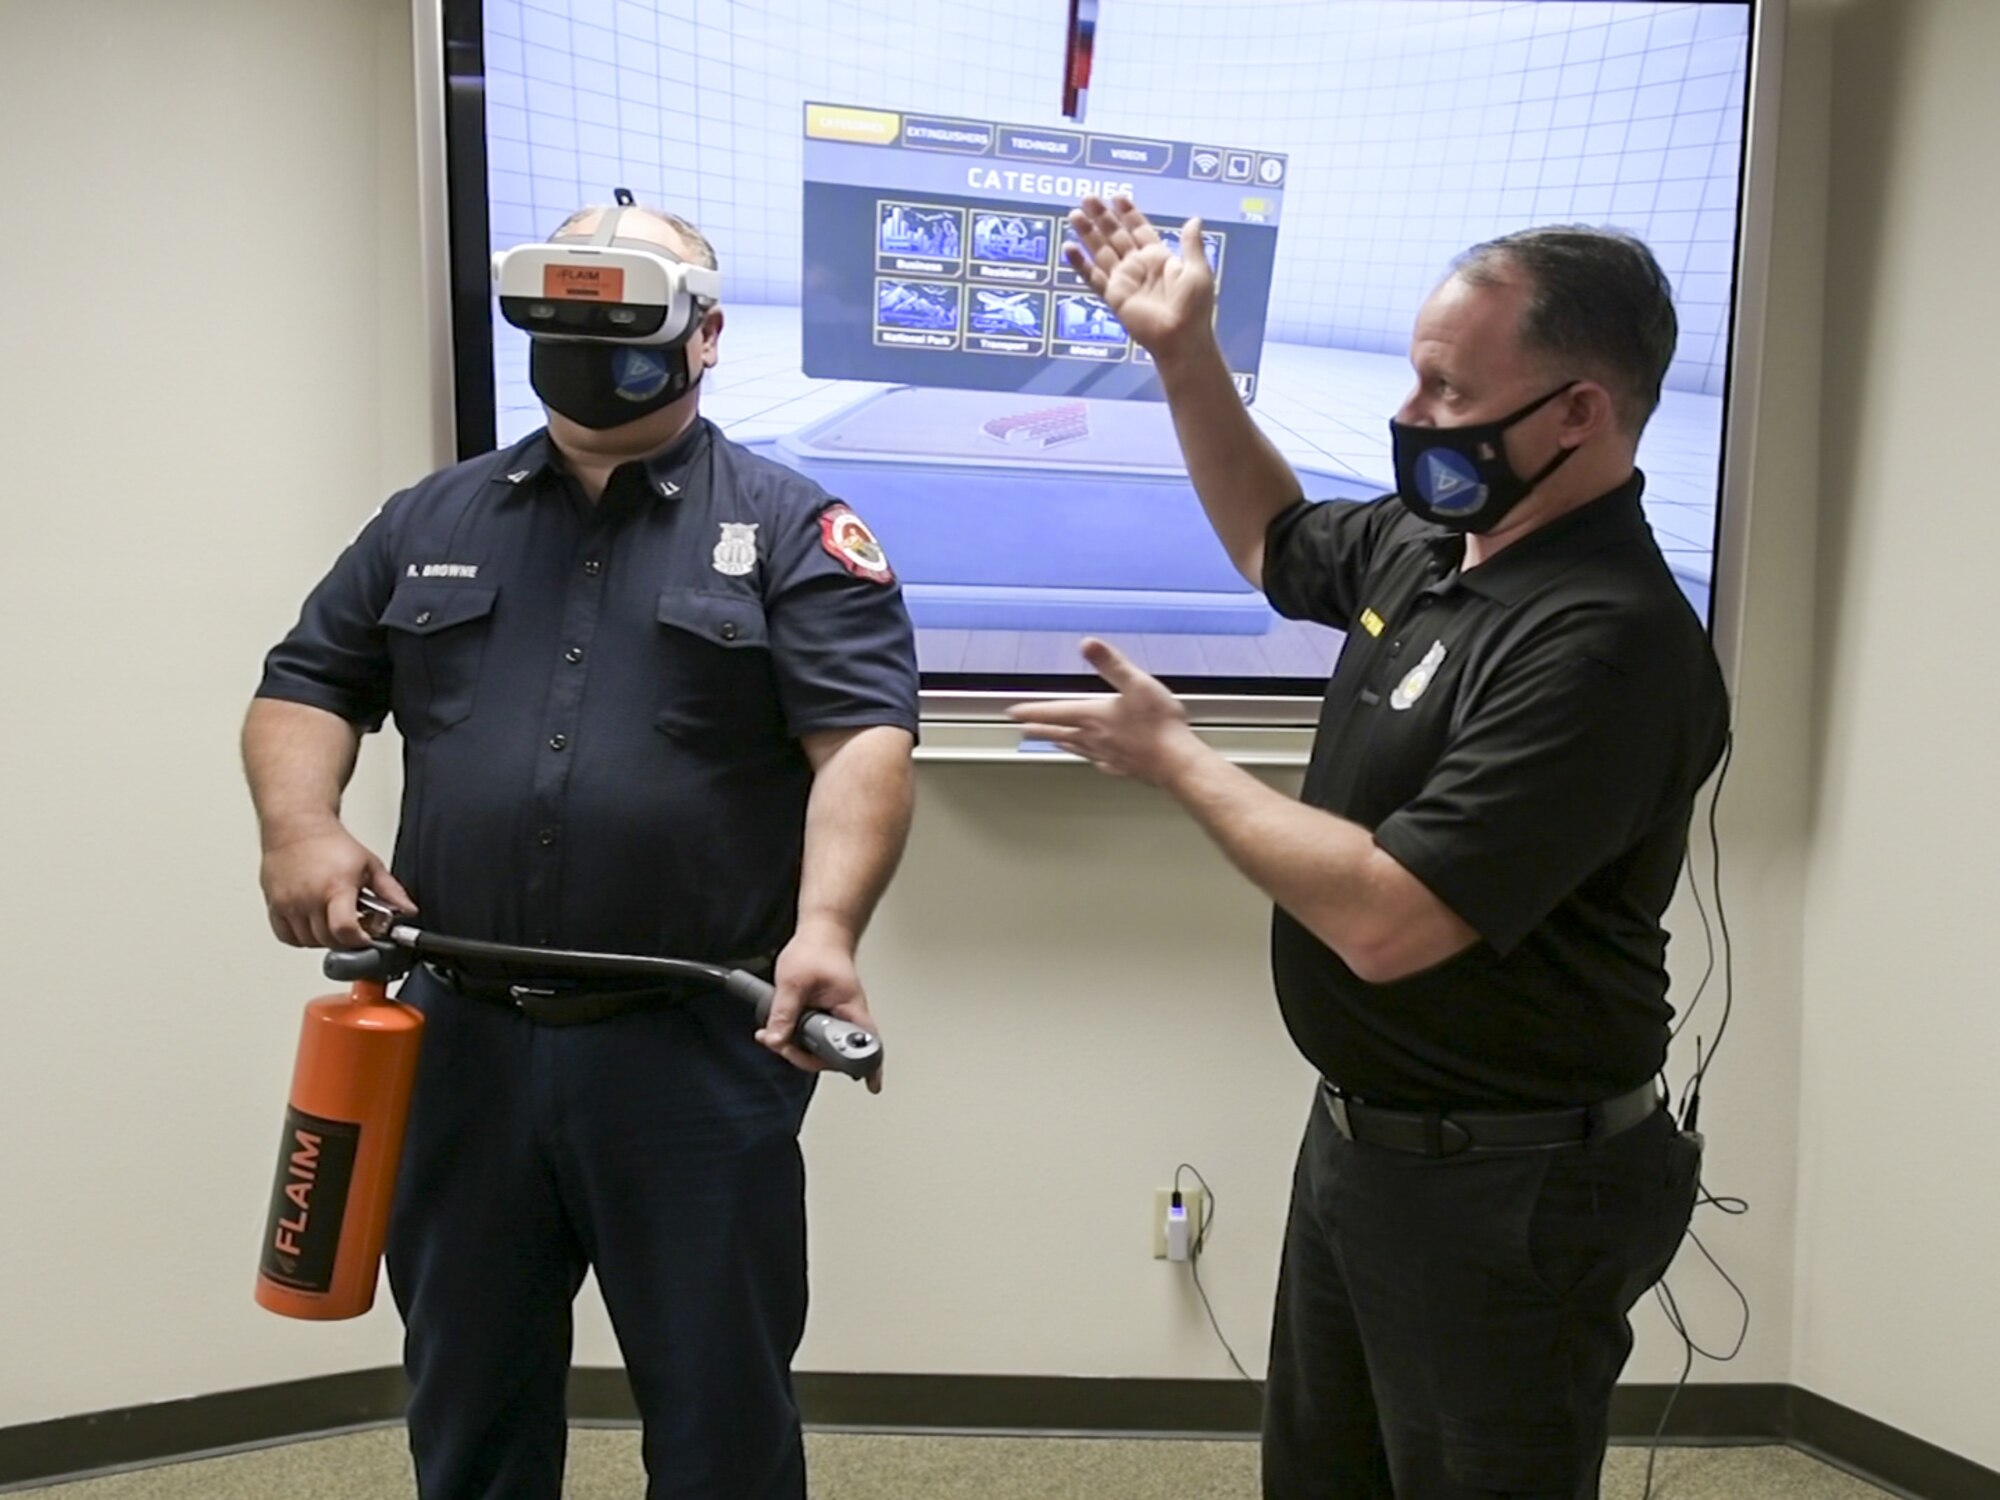 Mike Pinan, Assistant Chief for Fire Prevention, showcases the latest Edwards AFB Fire and Emergency Services' newest training tool. (Air Force photo by Giancarlo Casem)